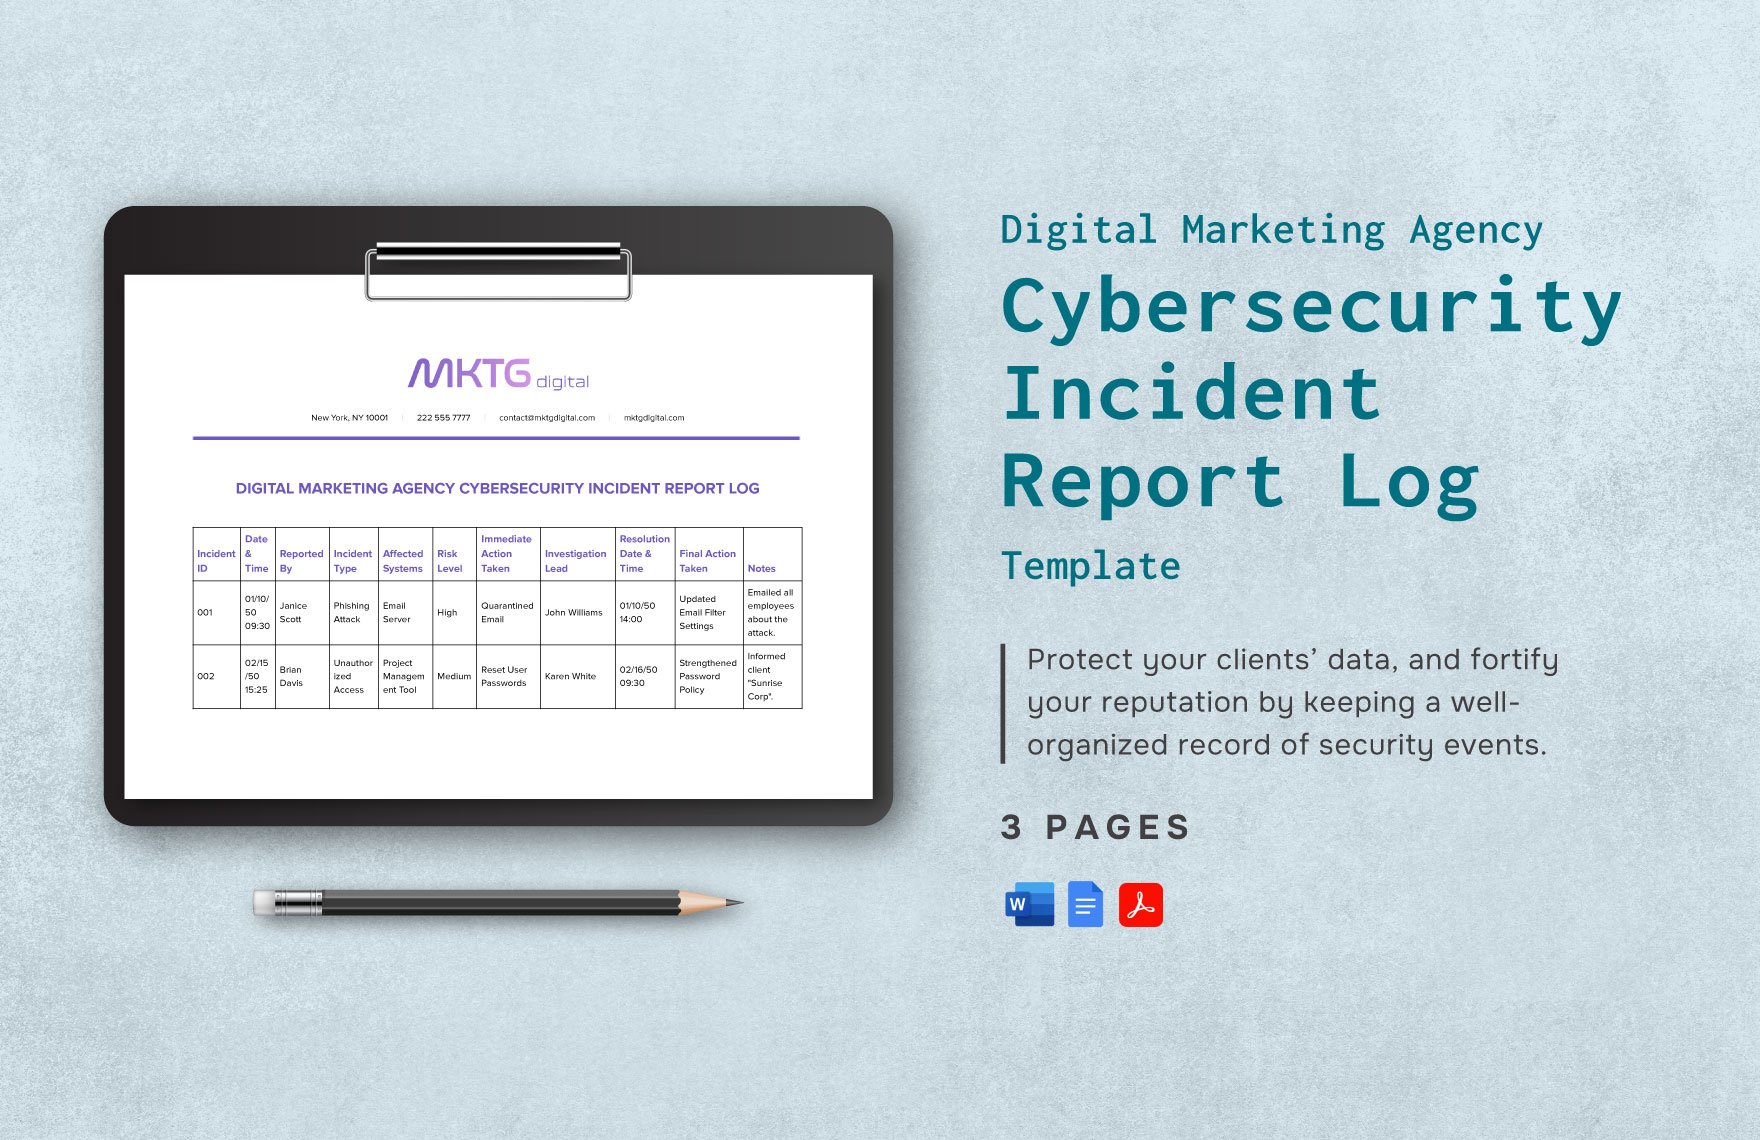 Digital Marketing Agency Cybersecurity Incident Report Log Template